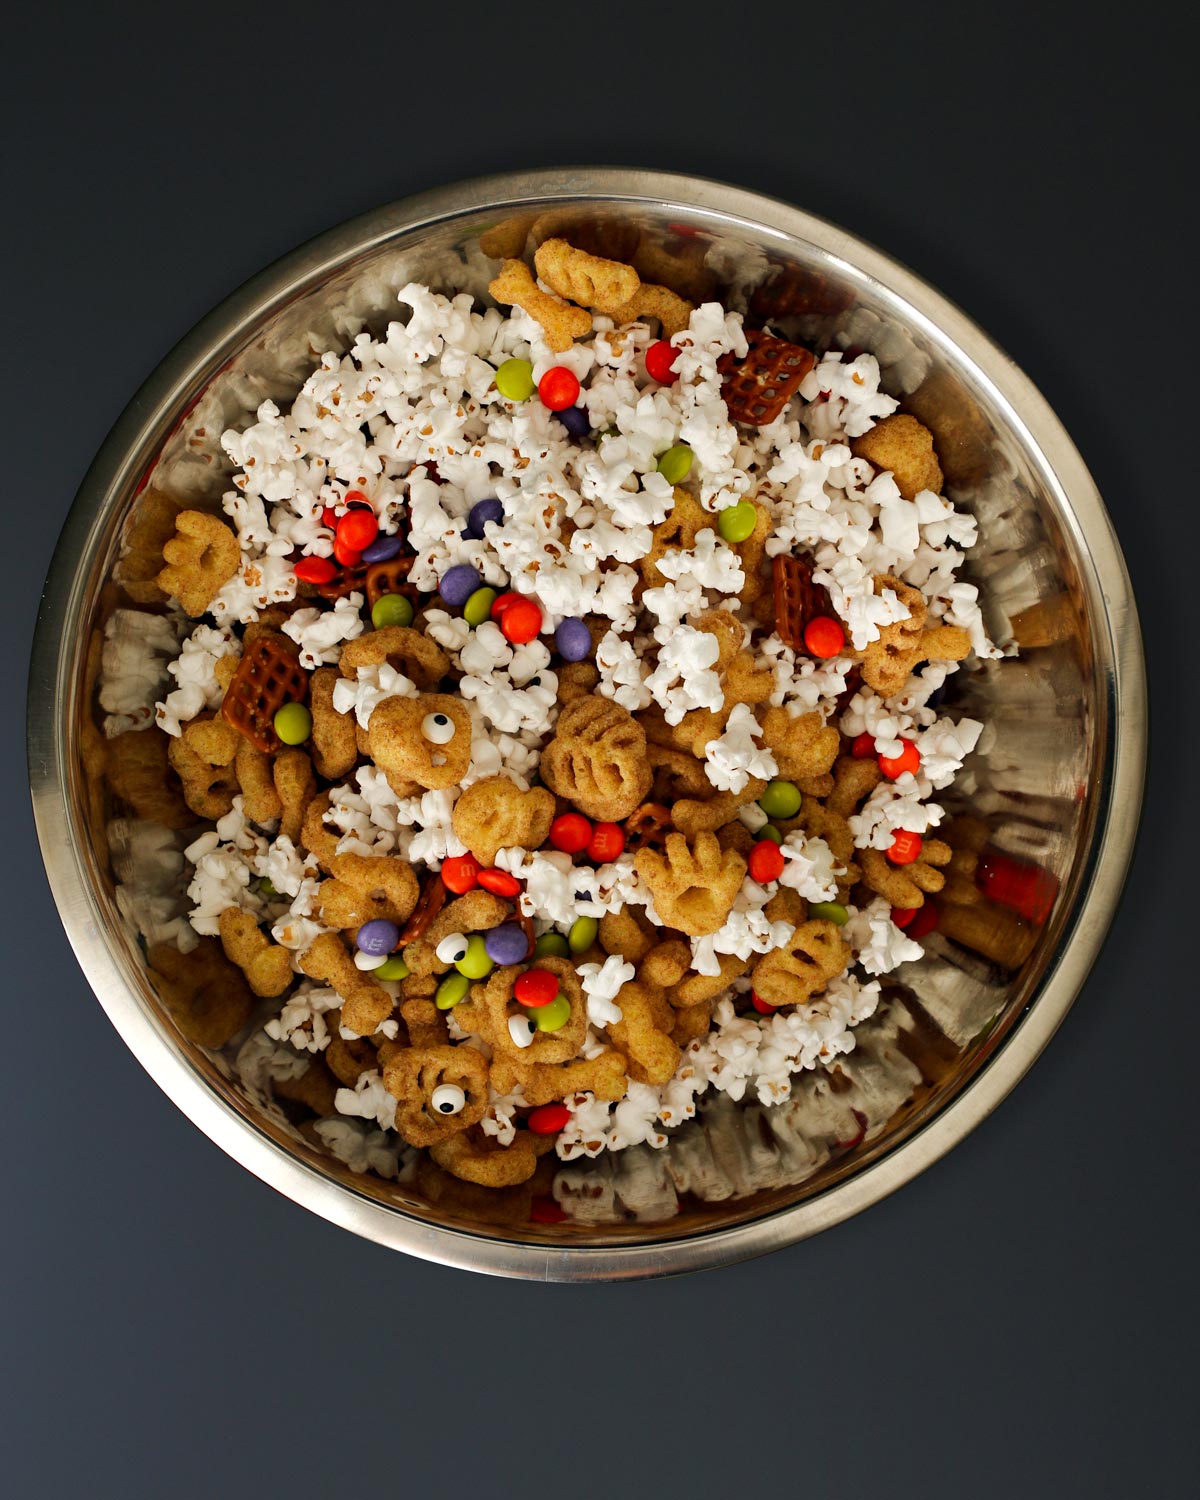 snack mix assembled in large bowl.